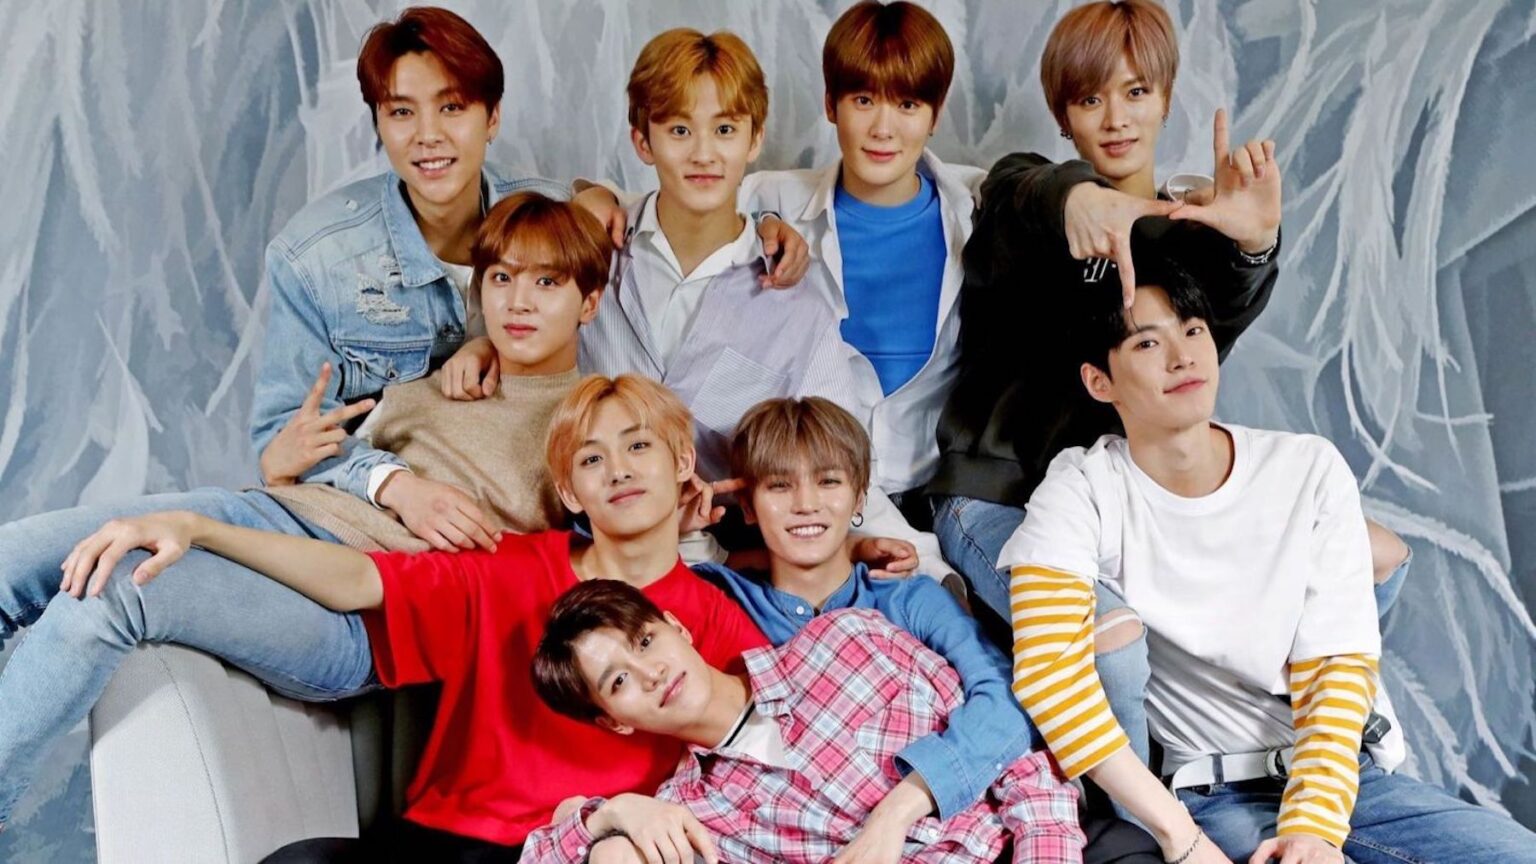 K-pop sensation NCT has embraced the idea of unlimited band members. Find out who your next NCT bias is by getting to know the boys.